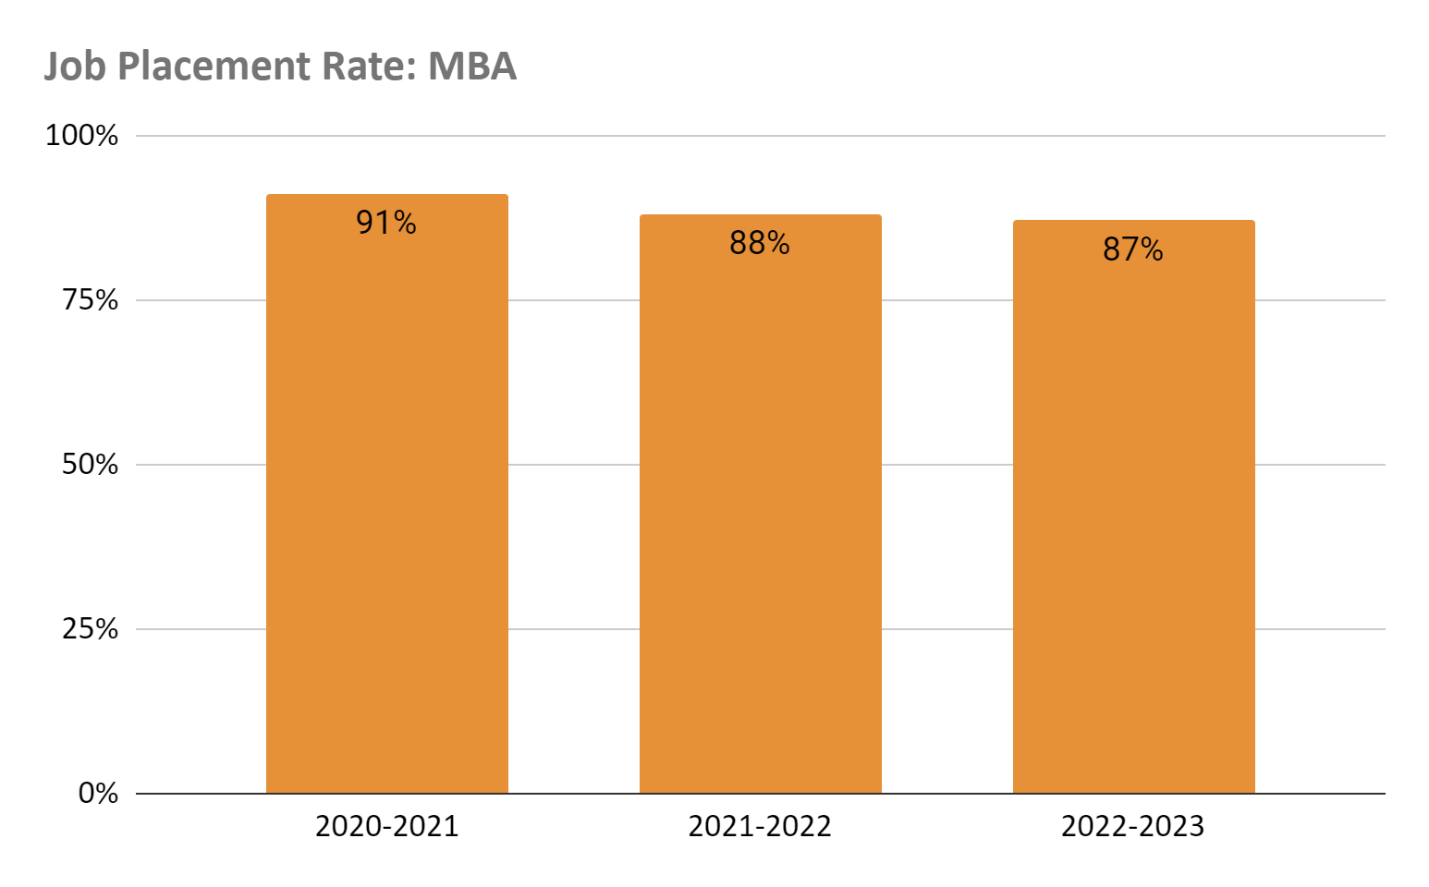 Job Placement Rate - MBA